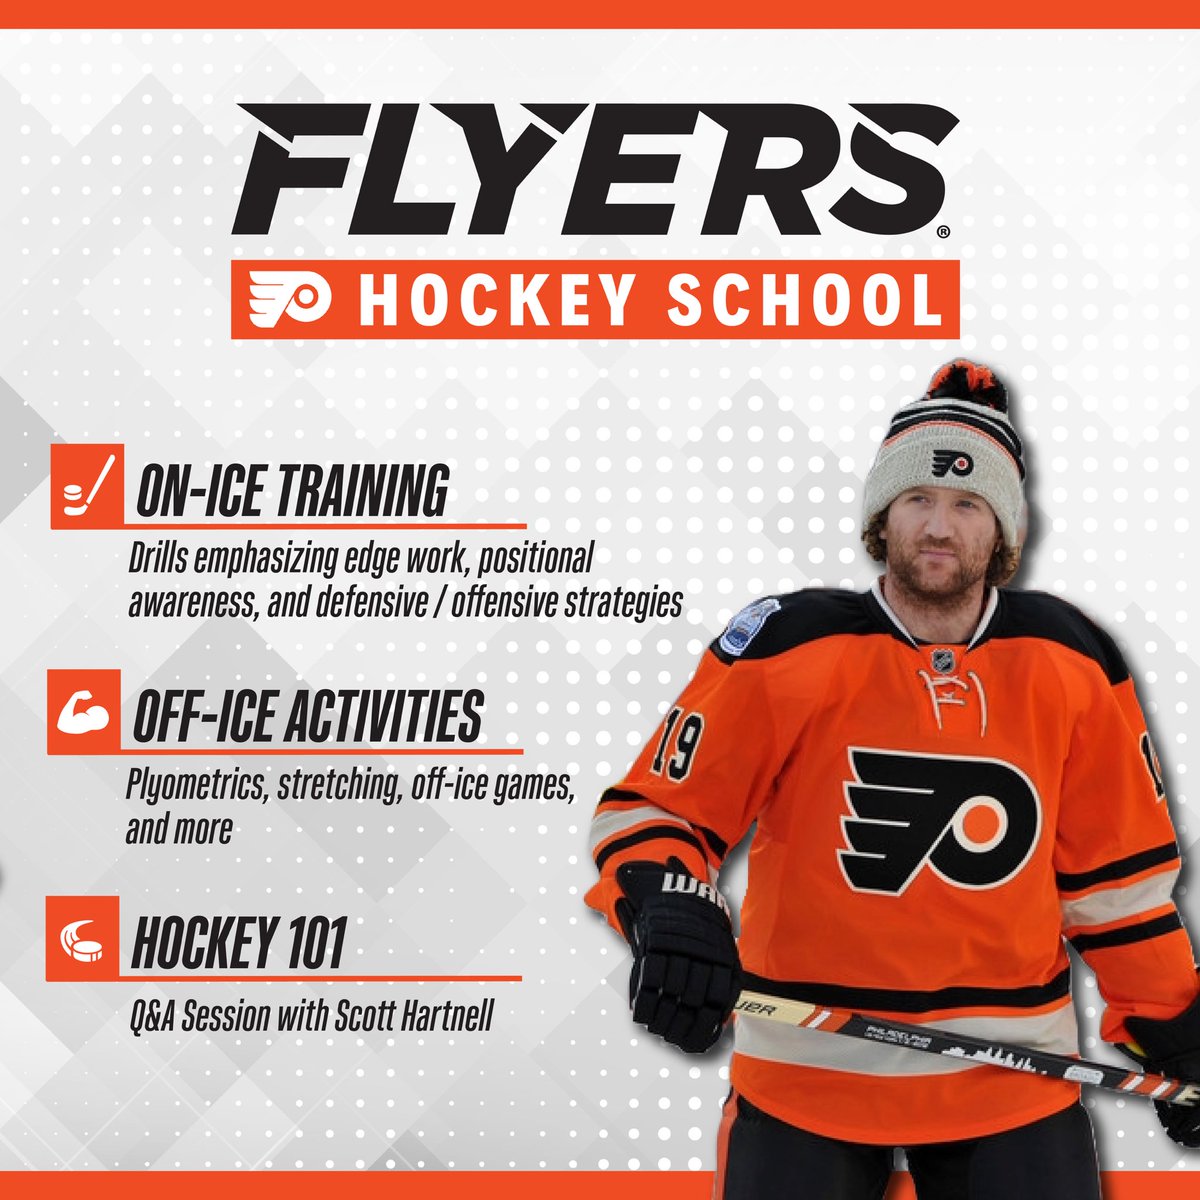 Flyers Hockey School kicks off this summer, with guest coach Scott Hartnell! Registration is open for this 4-day hockey camp, which includes on-ice training, off-ice activities, and more! Learn more at: bit.ly/37JjeH8